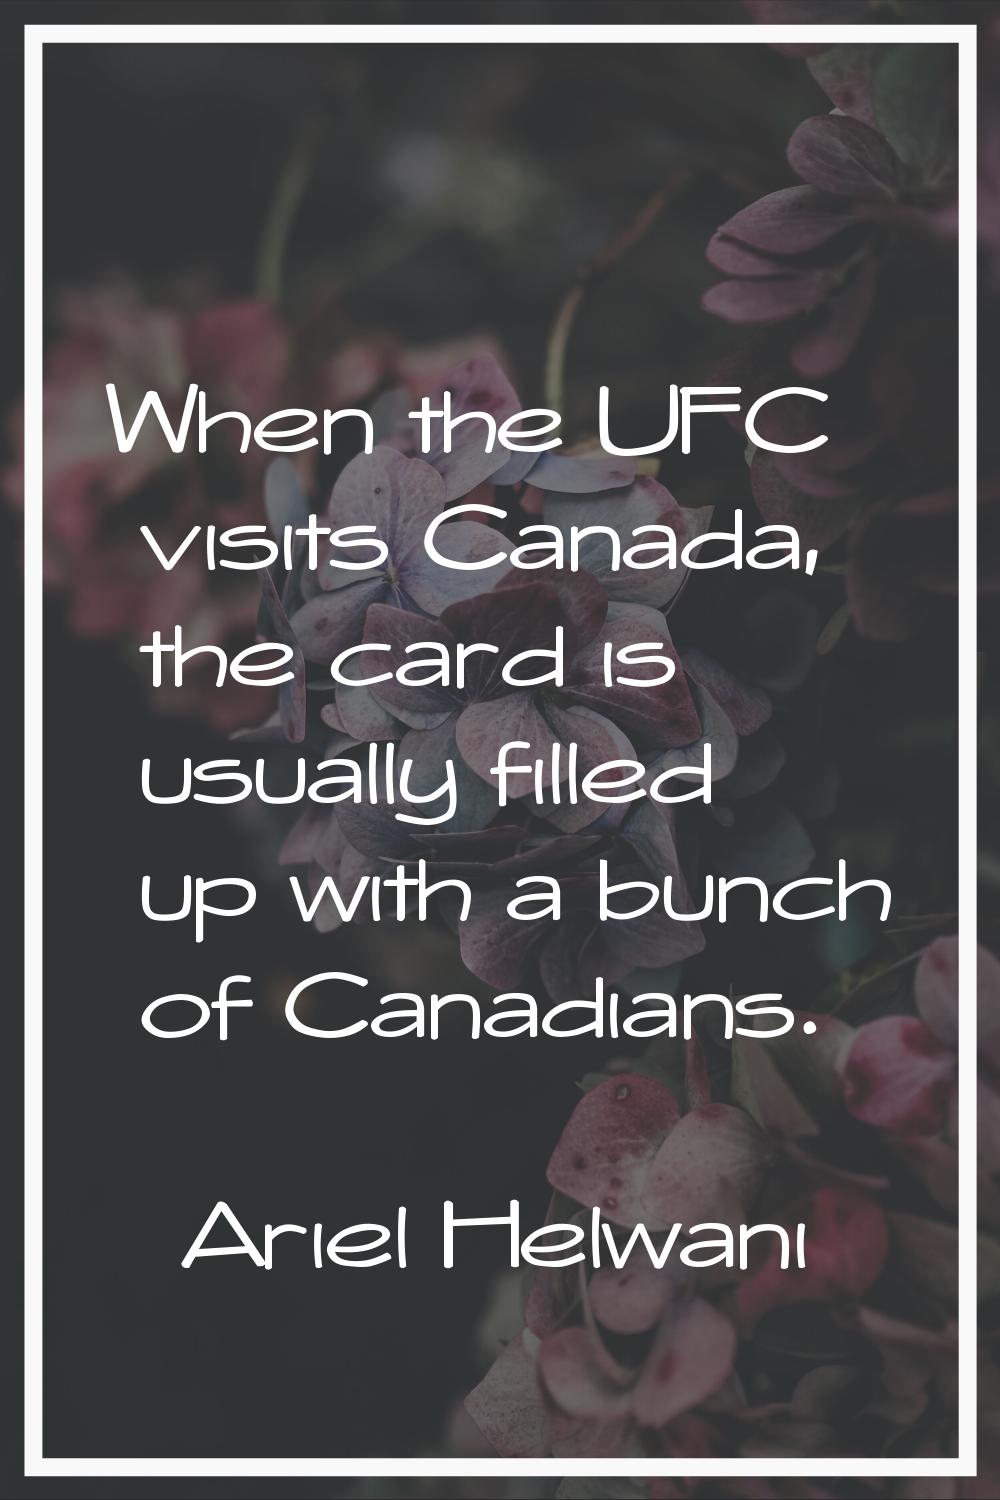 When the UFC visits Canada, the card is usually filled up with a bunch of Canadians.